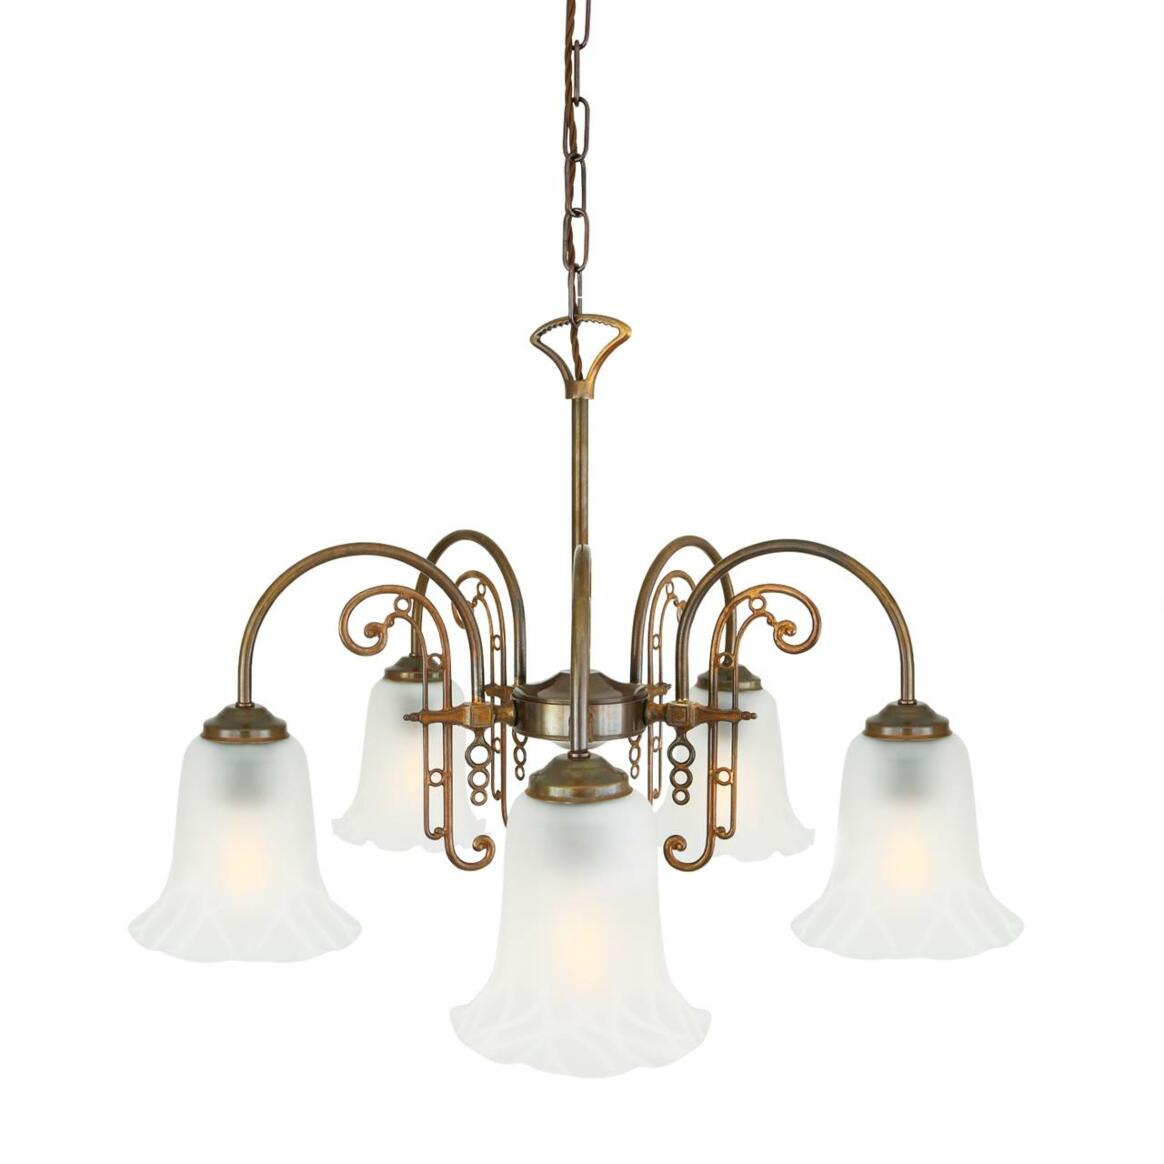 Medan Traditional Brass / Glass Chandelier, Five-Arm main product image